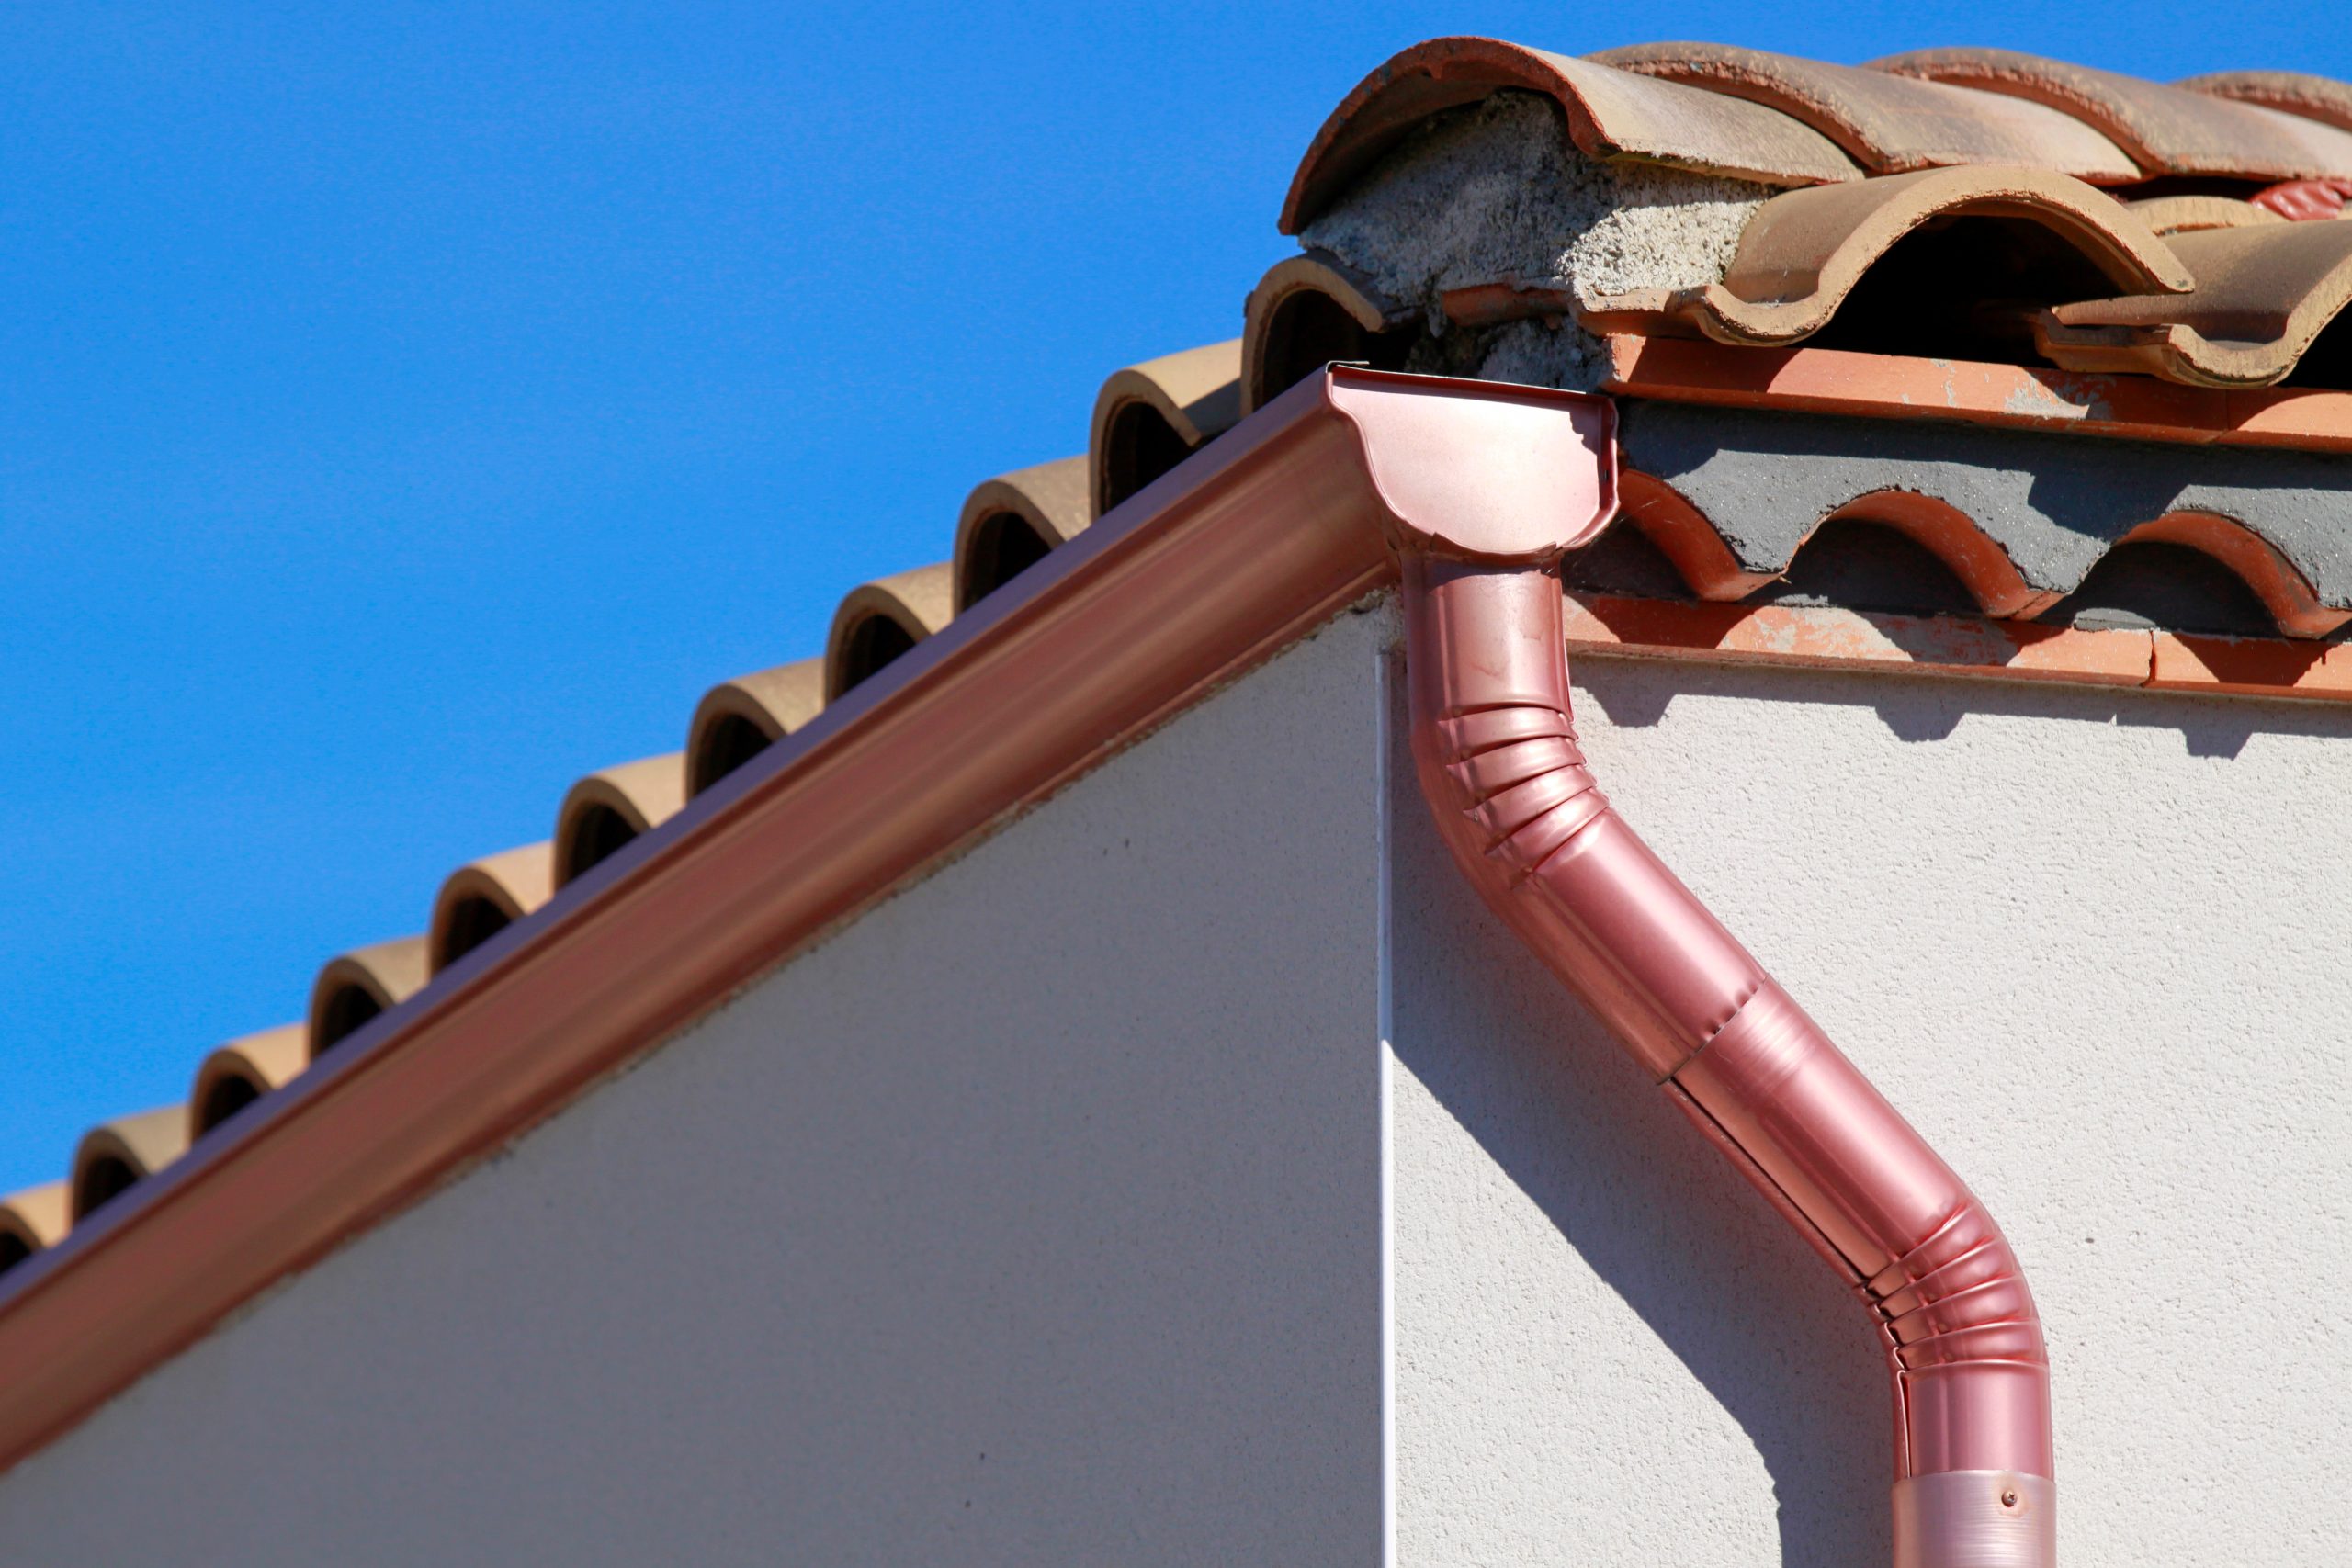 Close-up of copper seamless gutters on Spanish-style house, blue sky